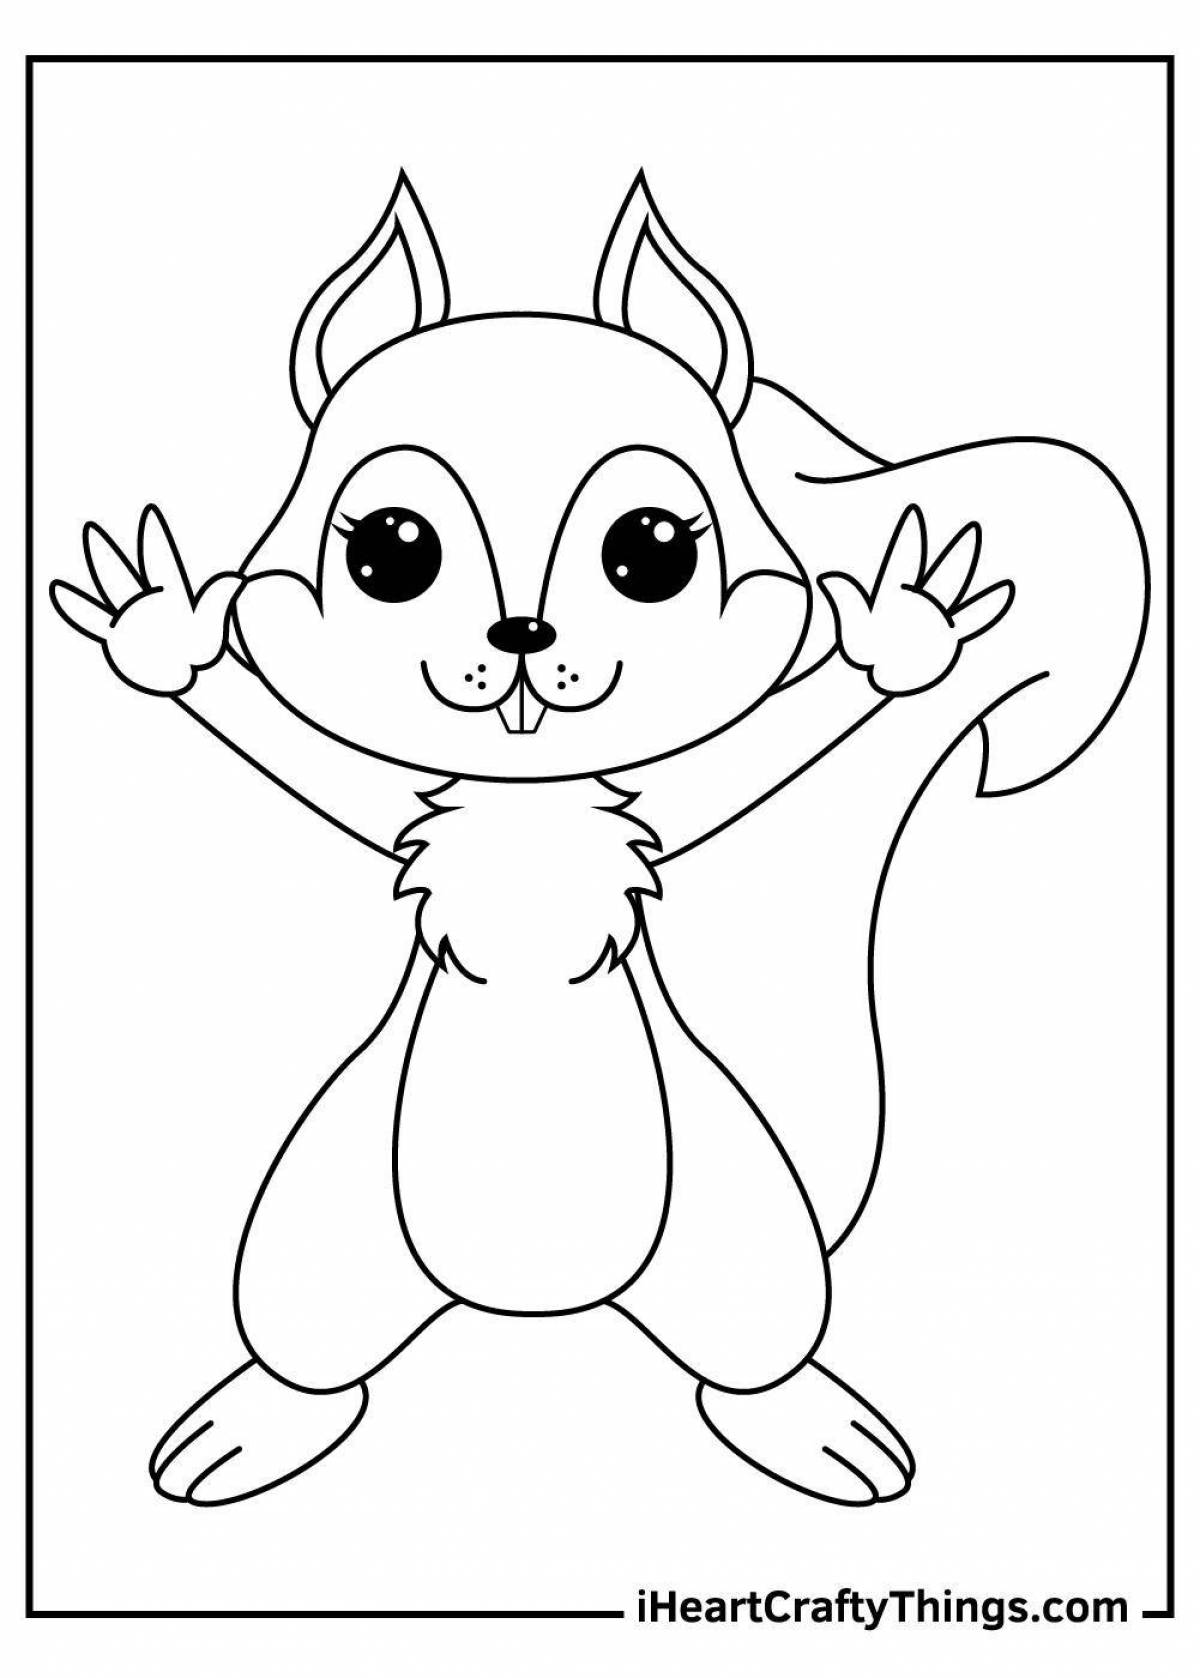 Squirrel Splatter Coloring Book for 6-7 year olds